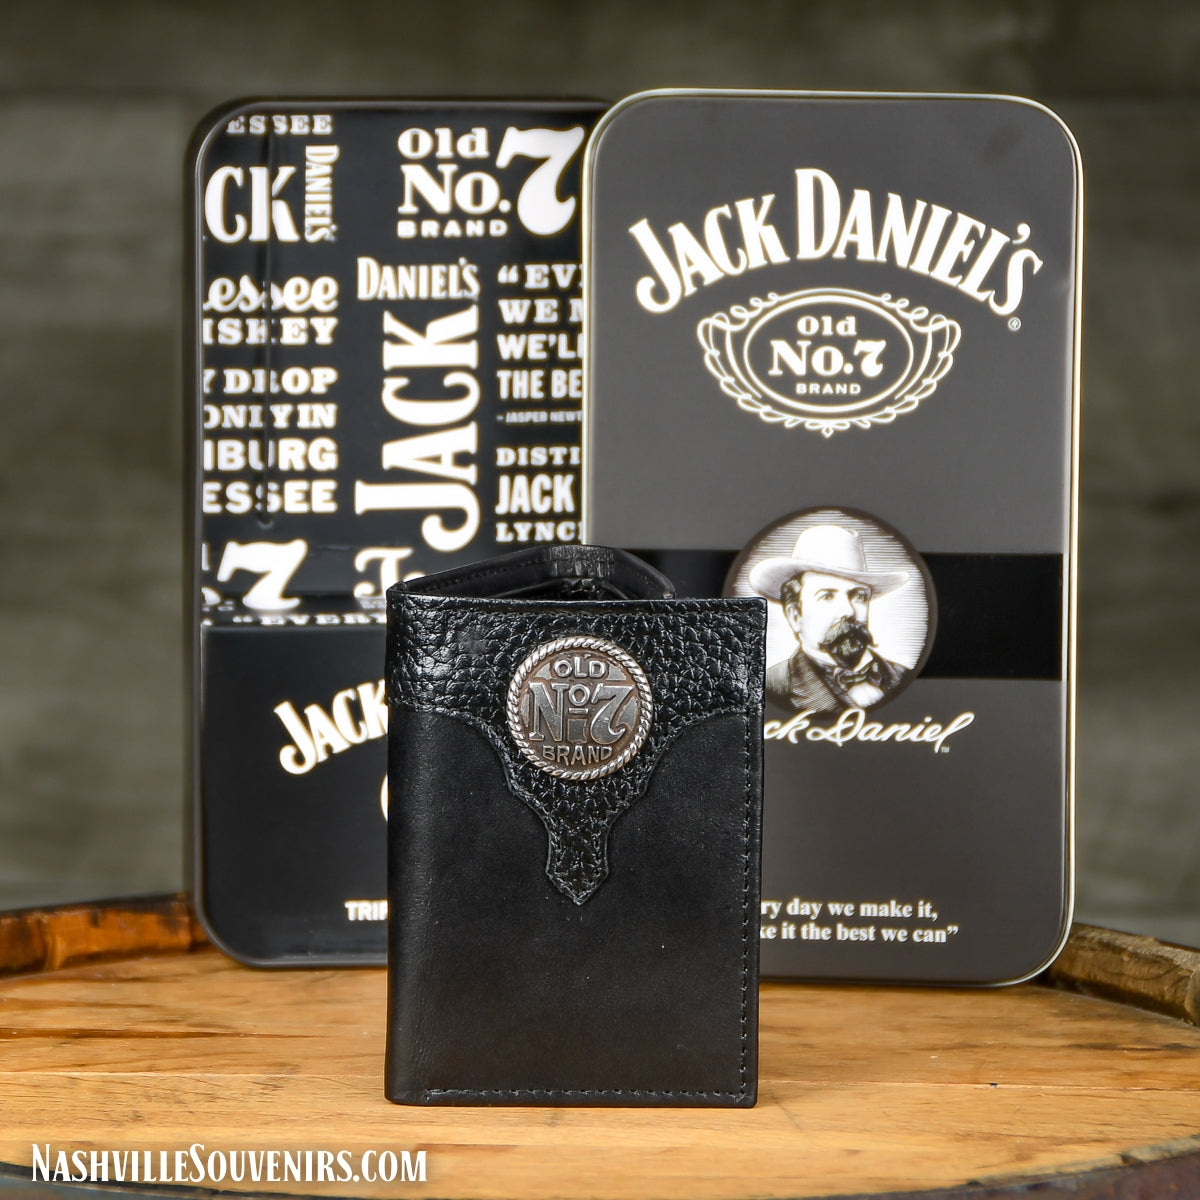 Officially licensed Black Jack Daniels TriFold Wallet with Old No.7 Medallion. Get one today with FREE SHIPPING on all US orders over $75!